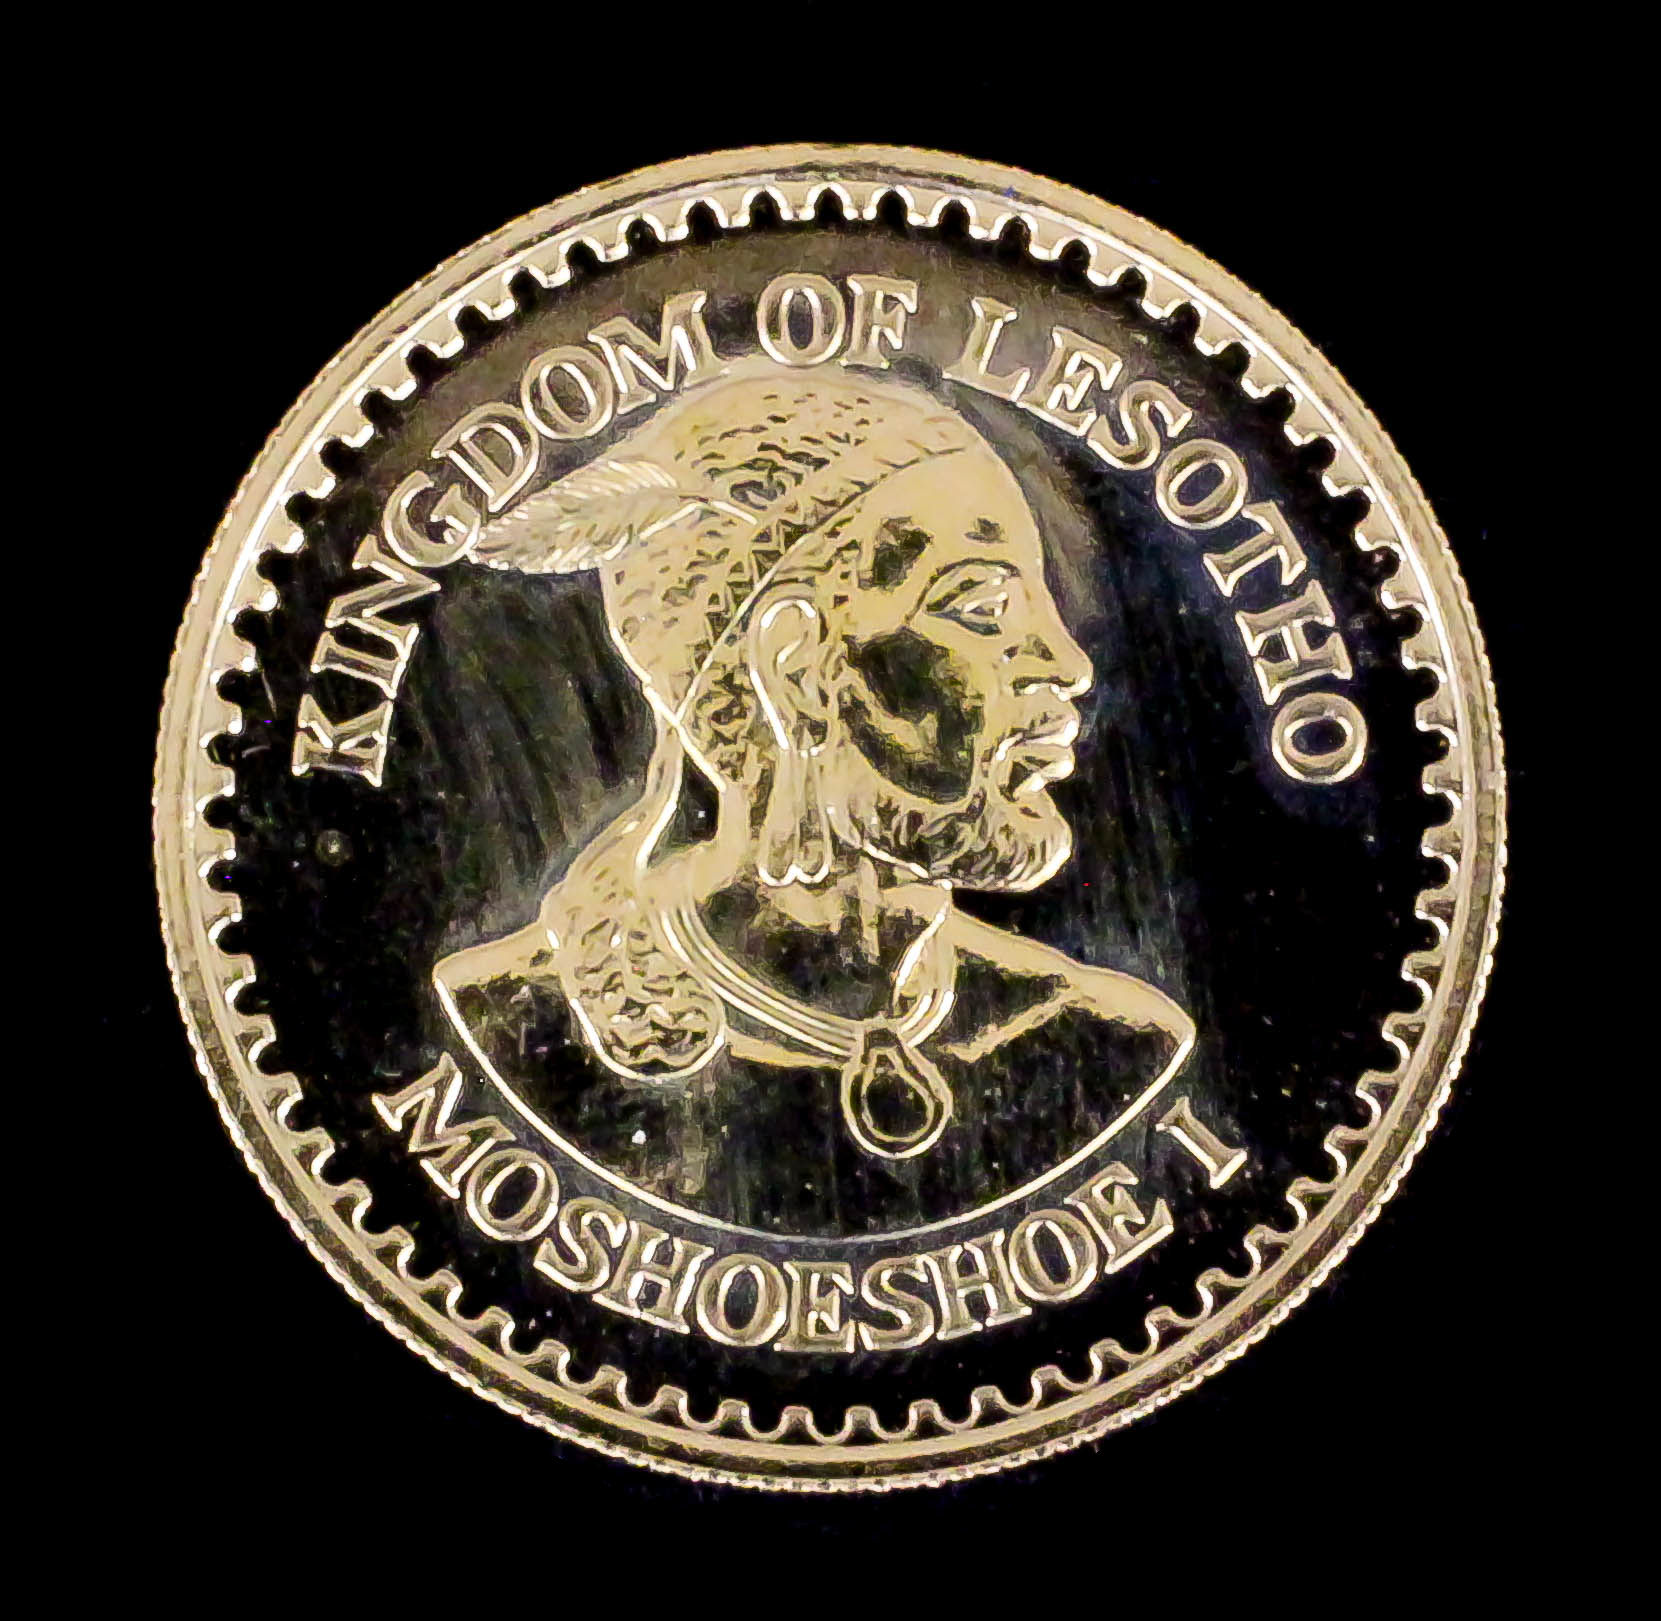 A Kingdom of Lesotho fine gold proof coin depicting Moshoeshoe I and commemorating International - Image 2 of 2